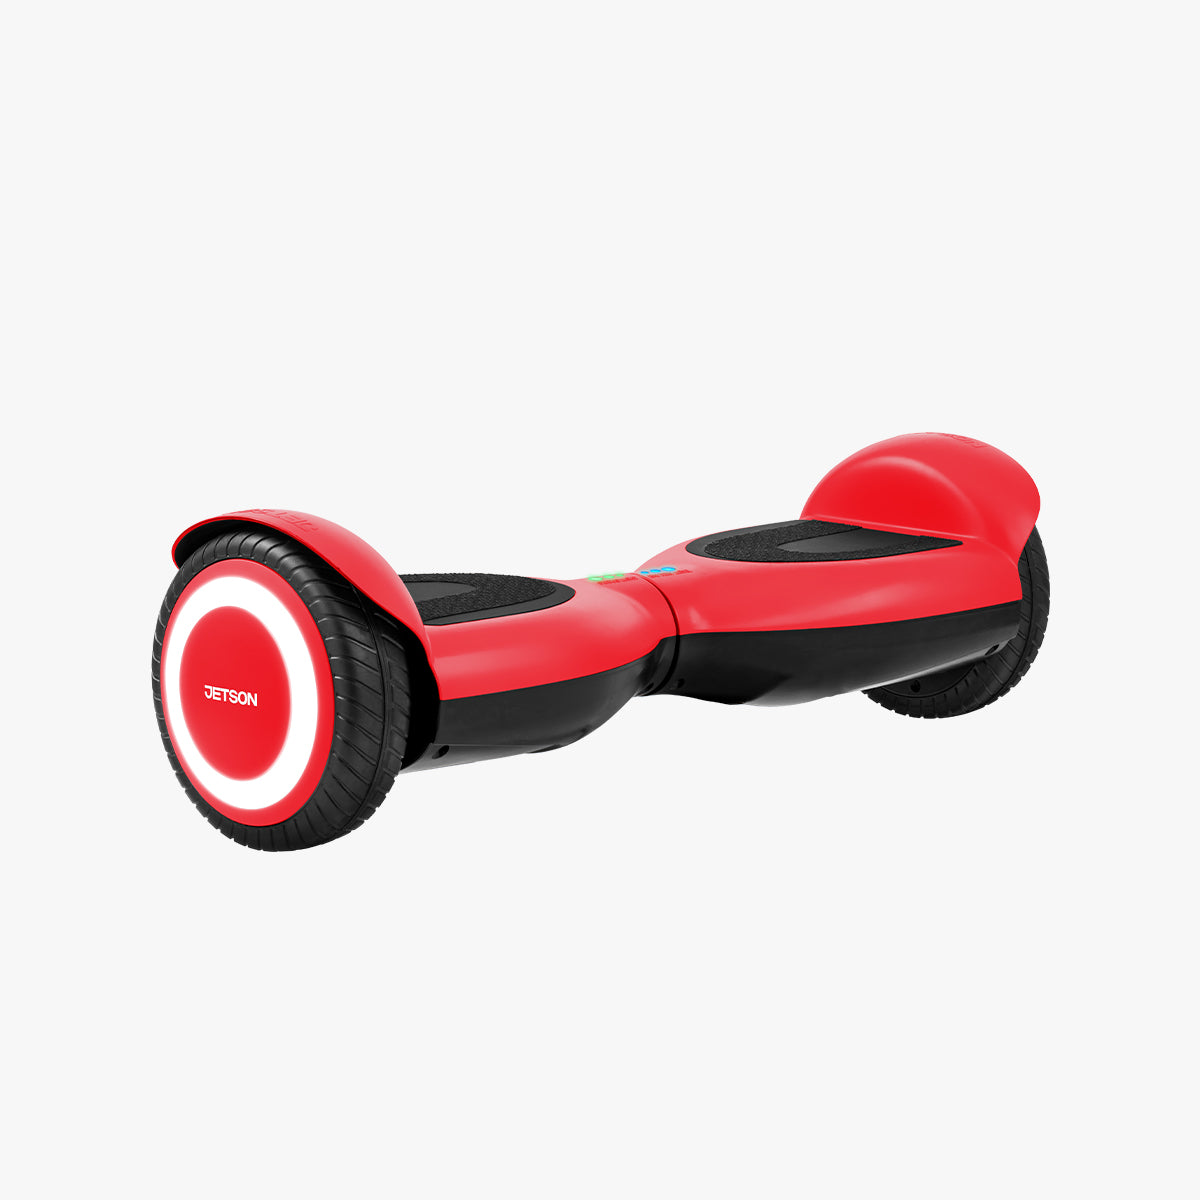 view of the red Prism hoverboard angled to the right